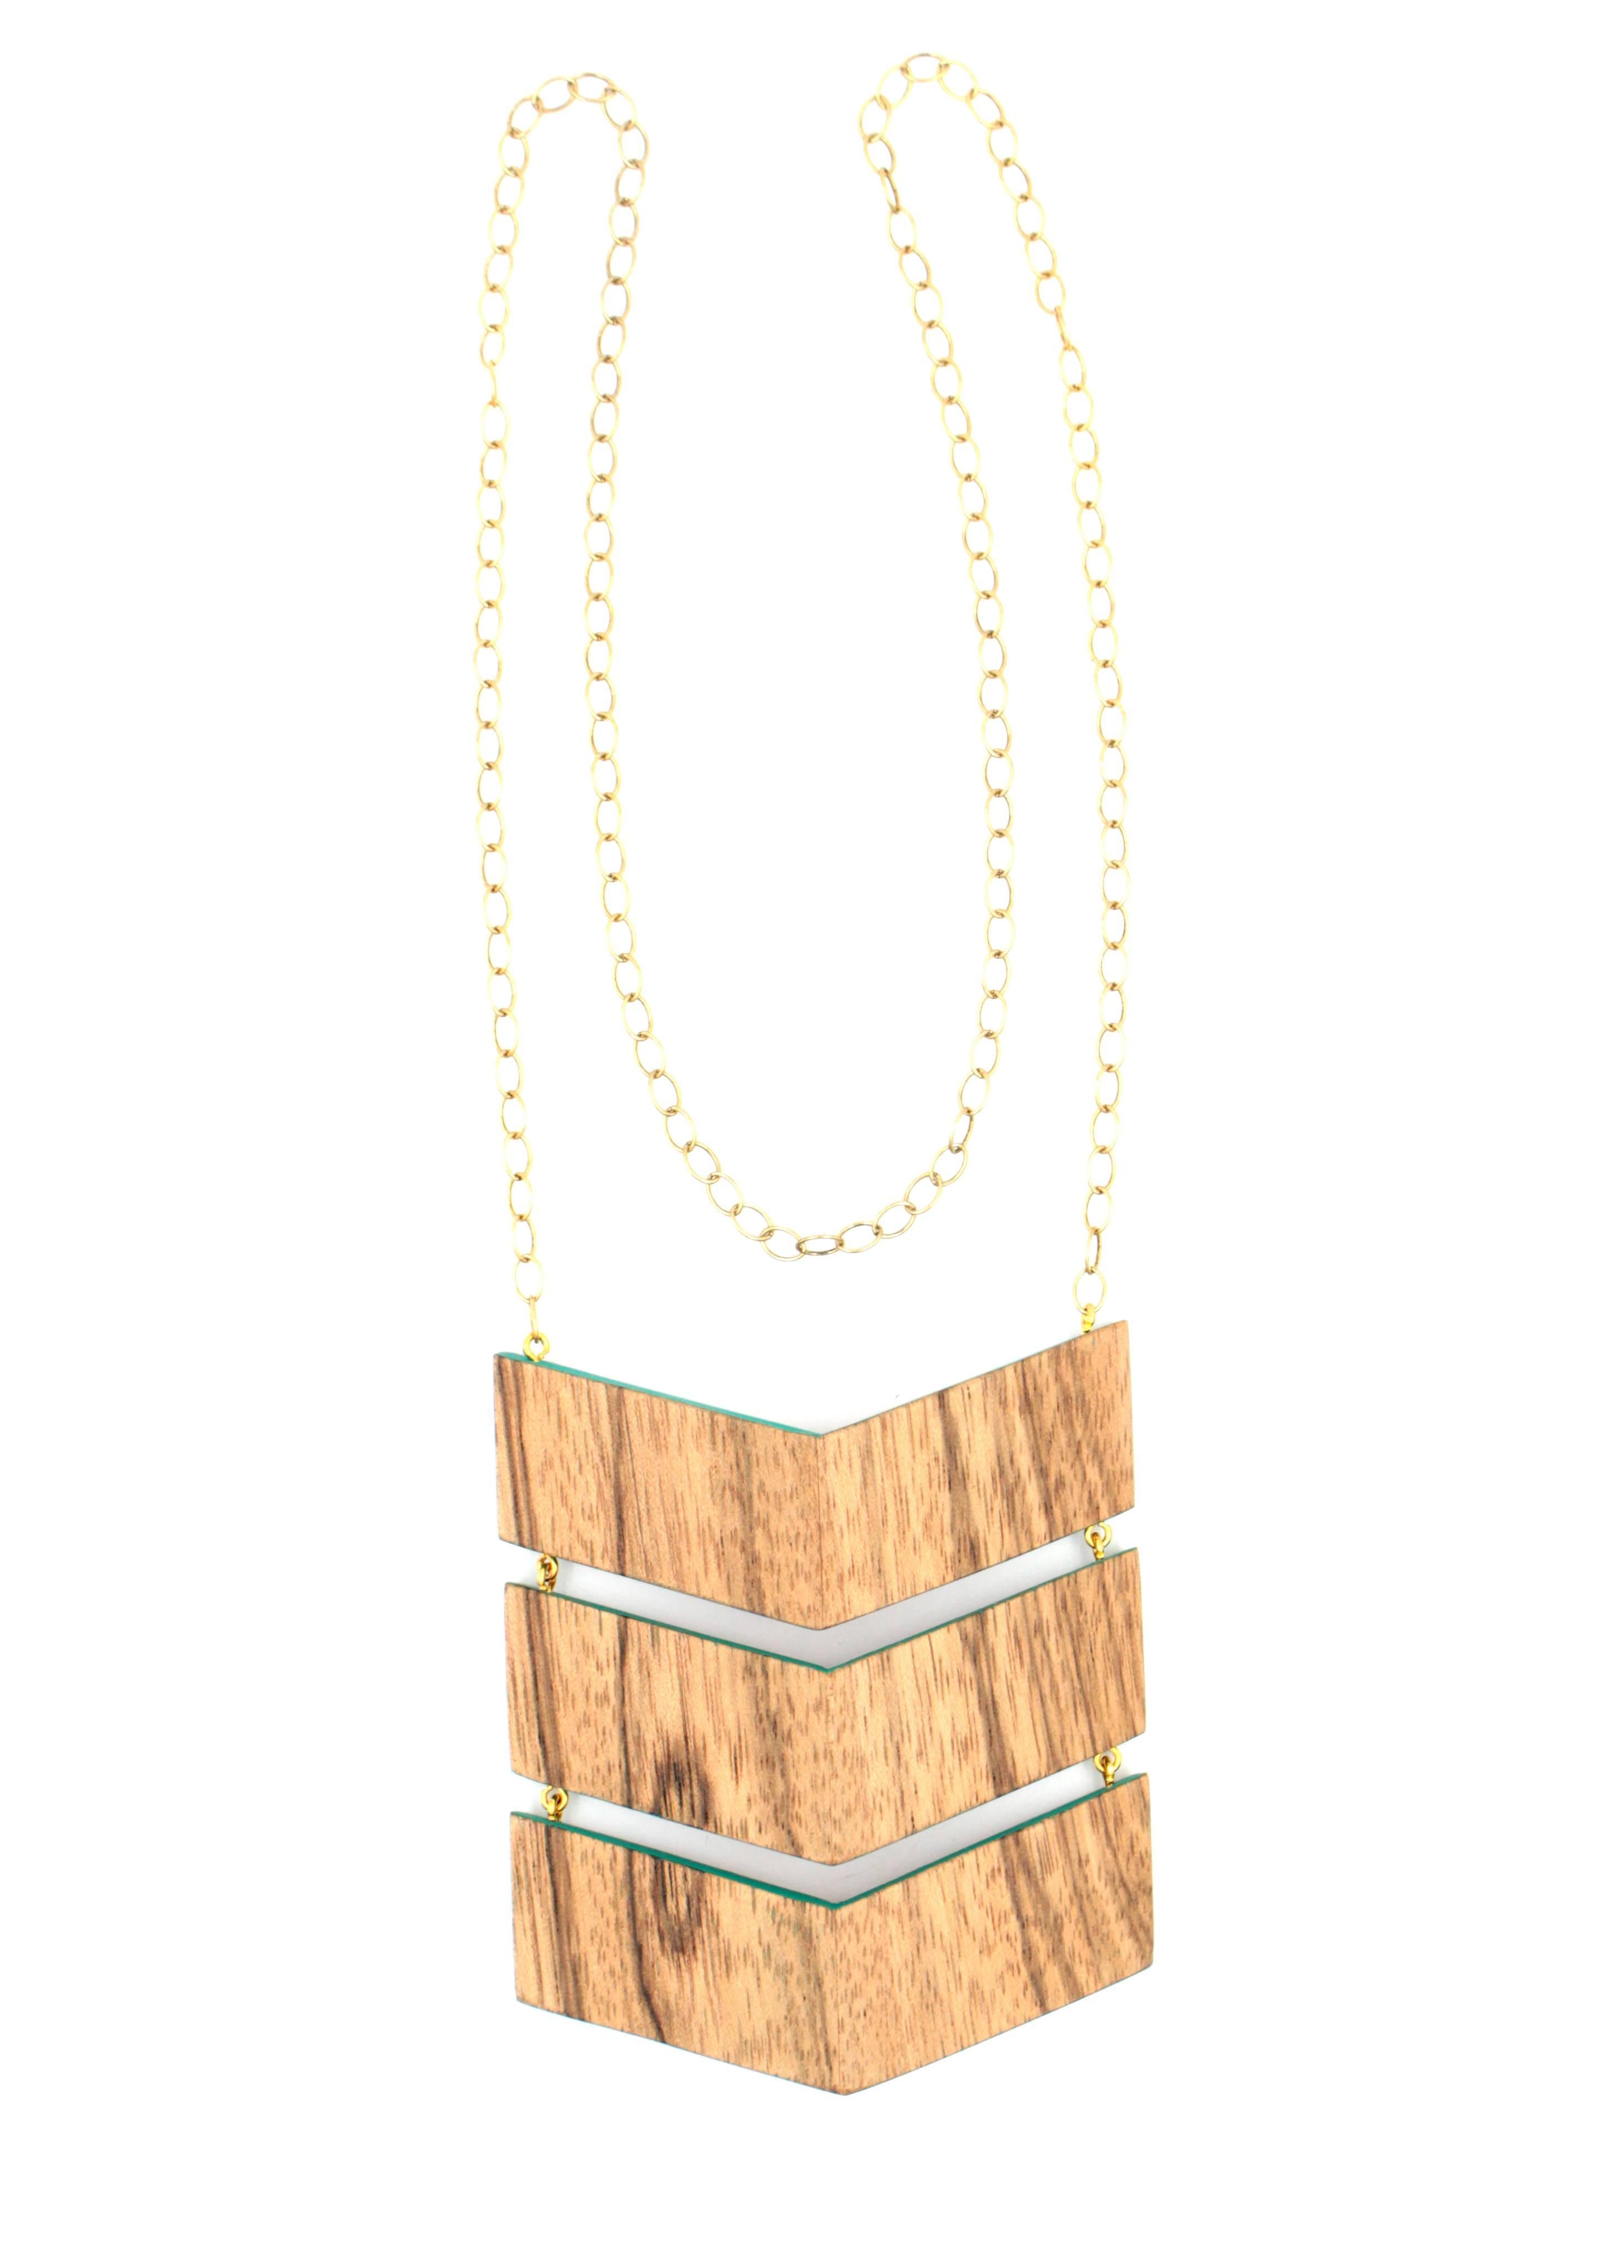 Three-tiered chevron shaped necklace with matching wood grain and blue-green accents.